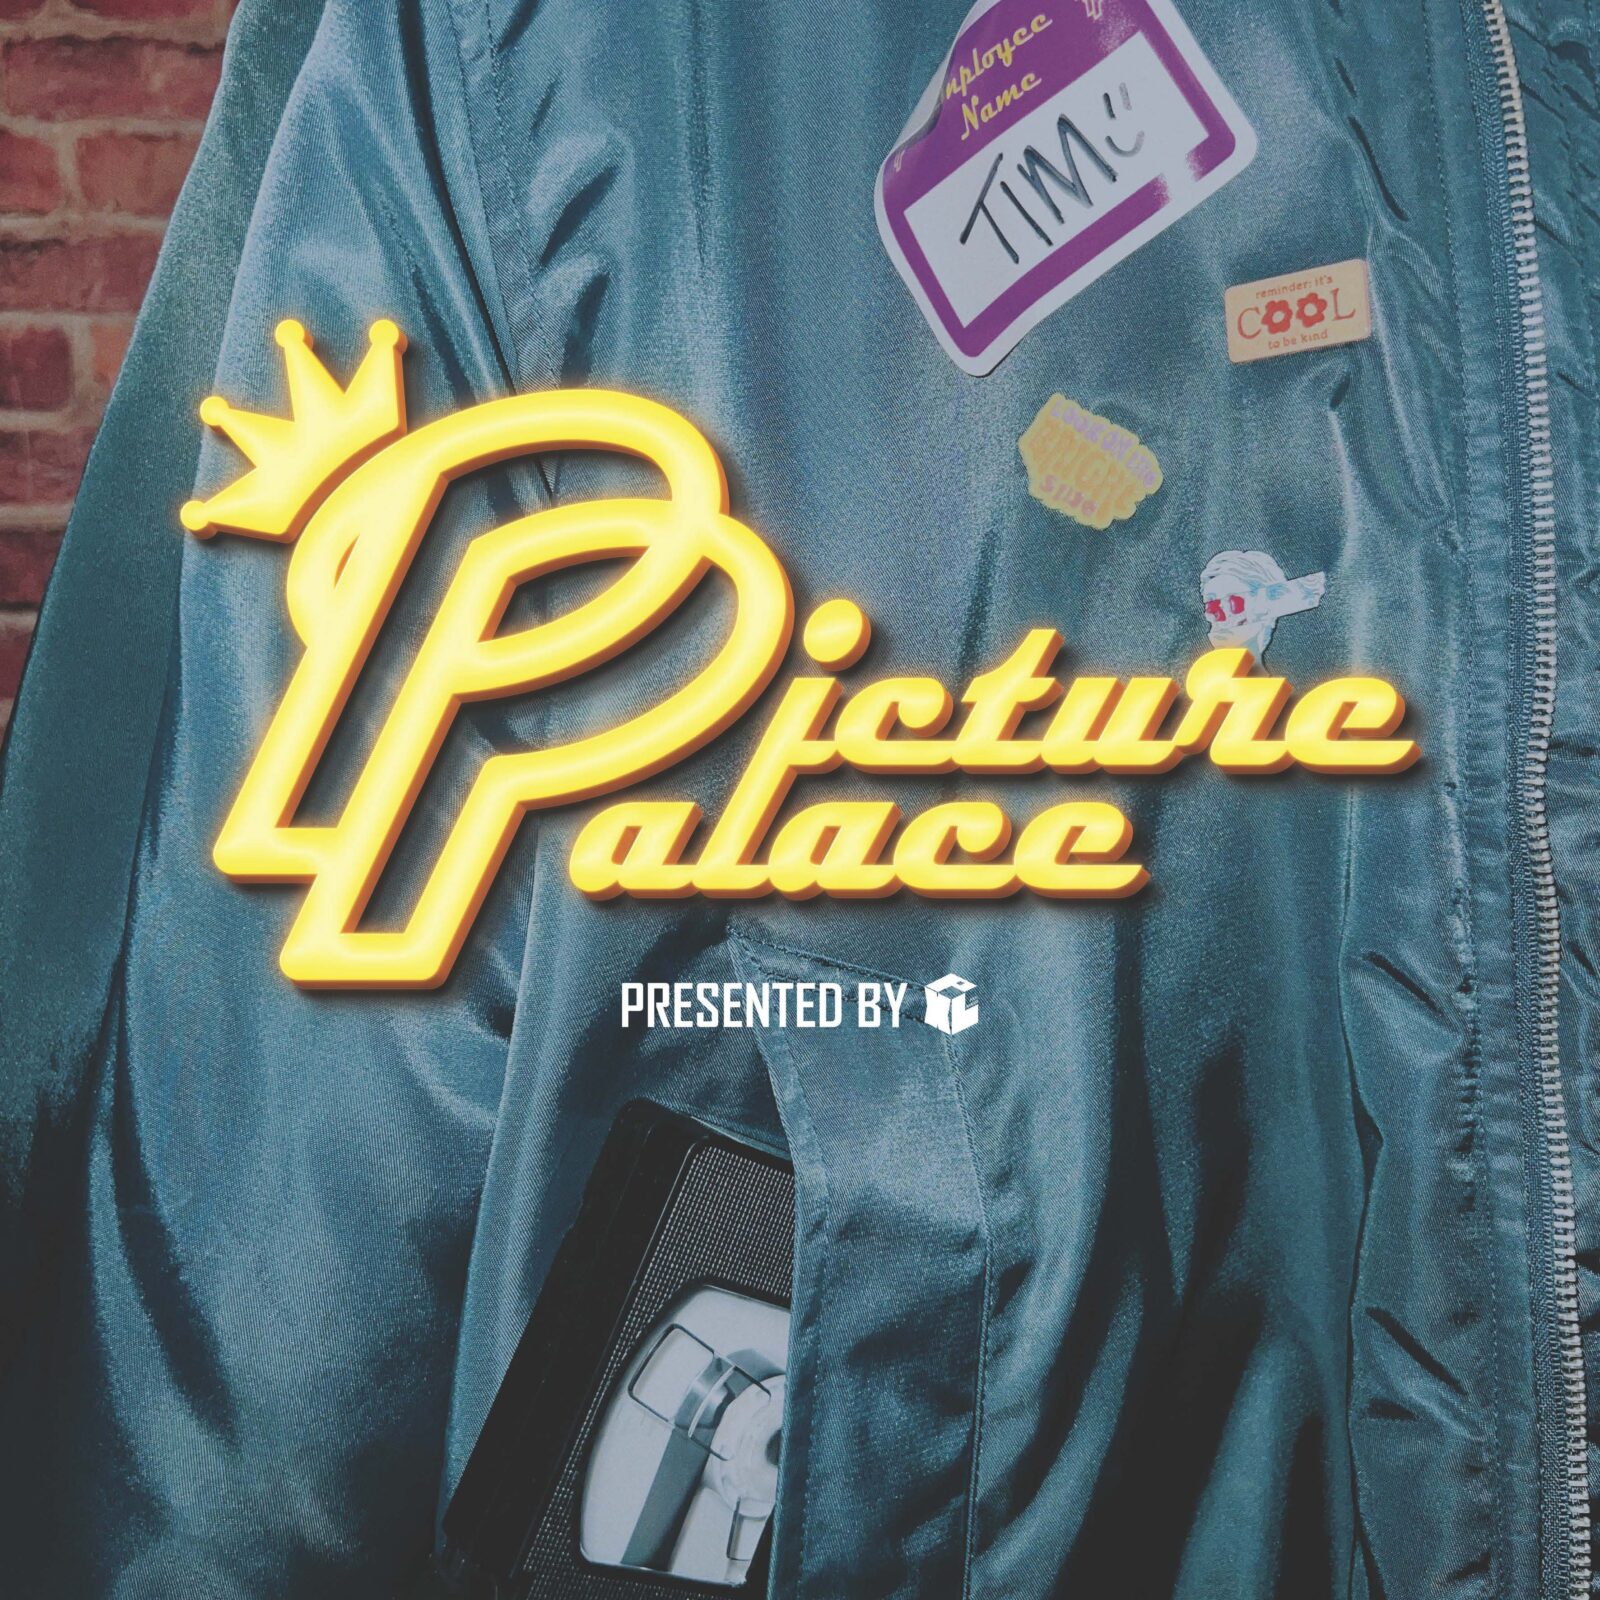 Retro turquoise 80s jacket, with video store employee sticker name badge, cassette tape in pocket, and film title "Picture Palace" in neon sign typeface. 